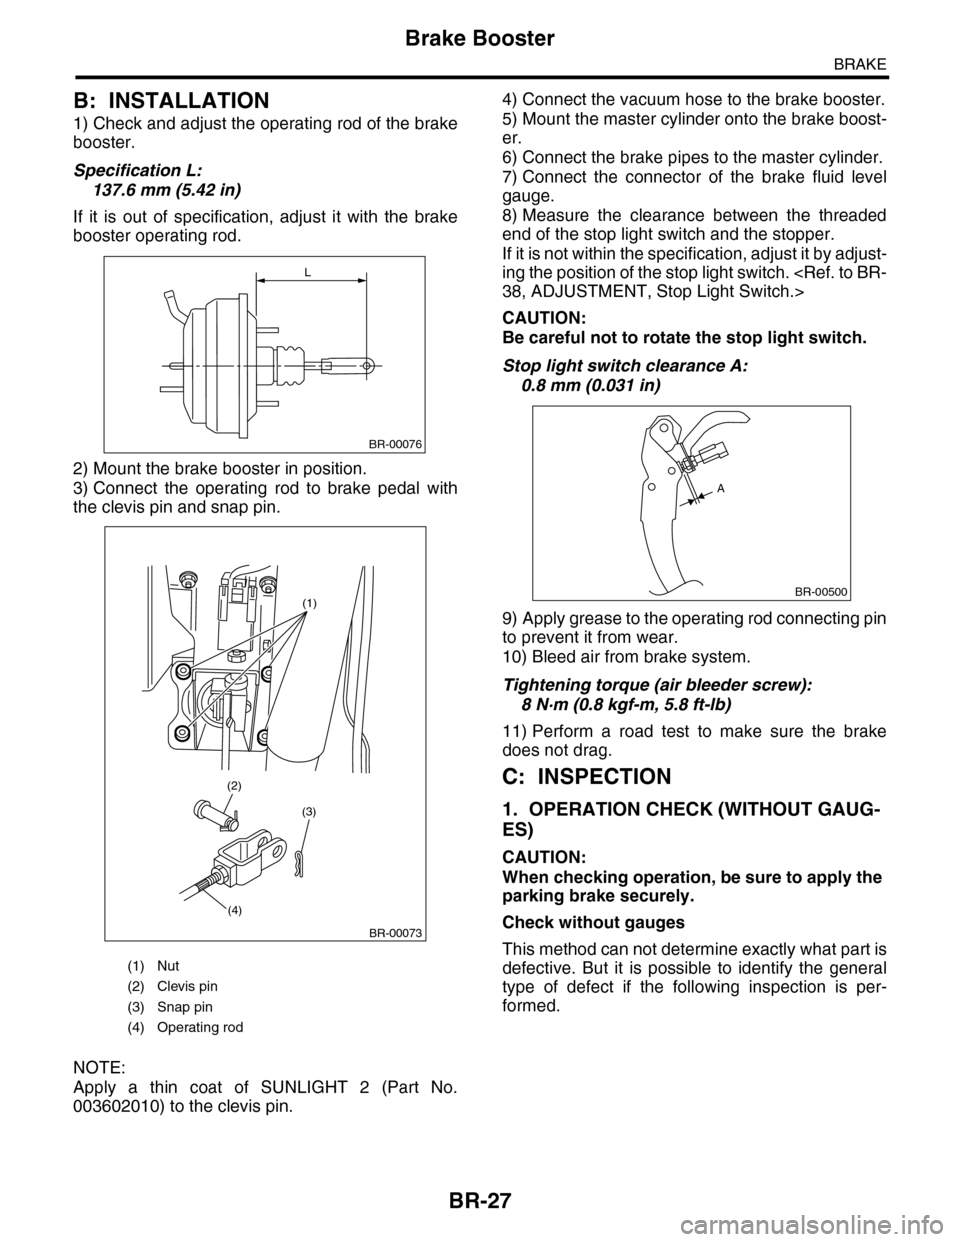 SUBARU TRIBECA 2009 1.G Service Workshop Manual BR-27
Brake Booster
BRAKE
B: INSTALLATION
1) Check and adjust the operating rod of the brake
booster.
Specification L:
137.6 mm (5.42 in)
If  it  is  out  of  specification,  adjust  it  with  the  br